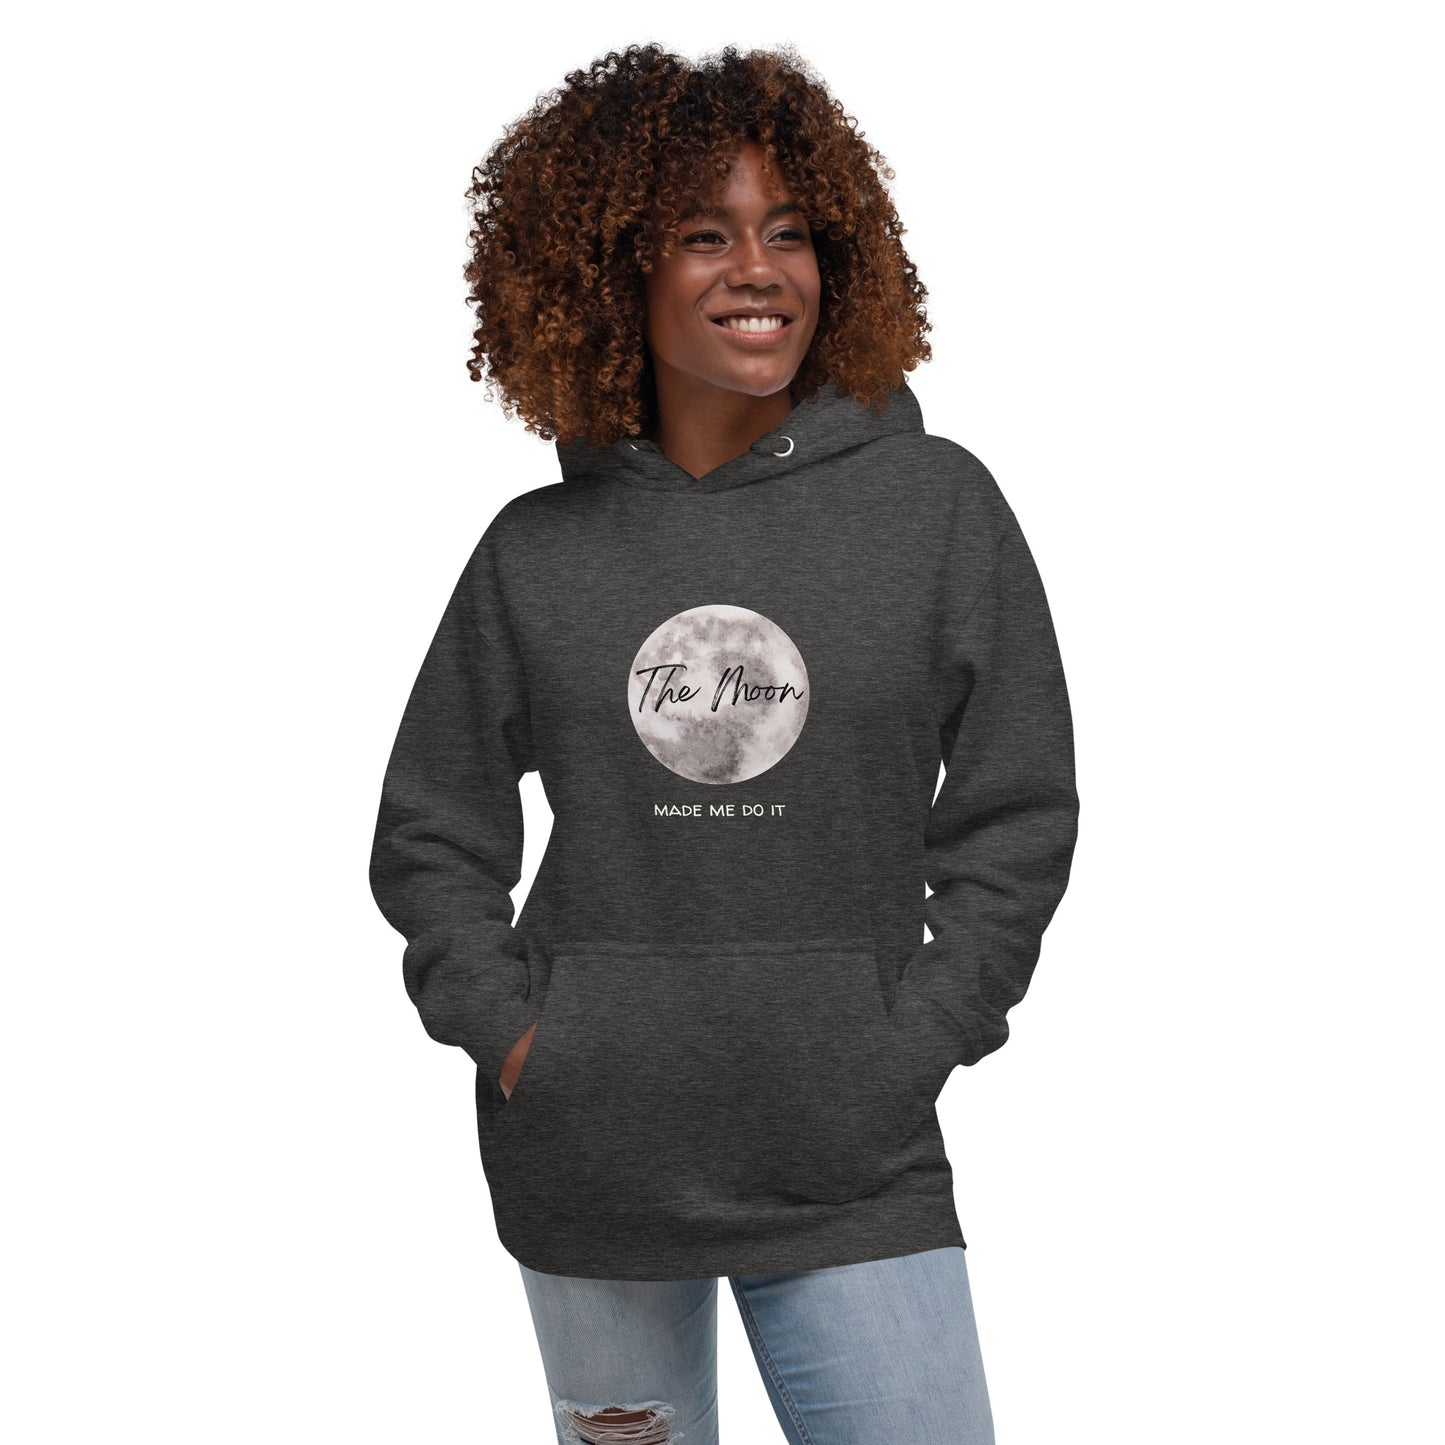 Unisex Hoodie The Moon made me do it